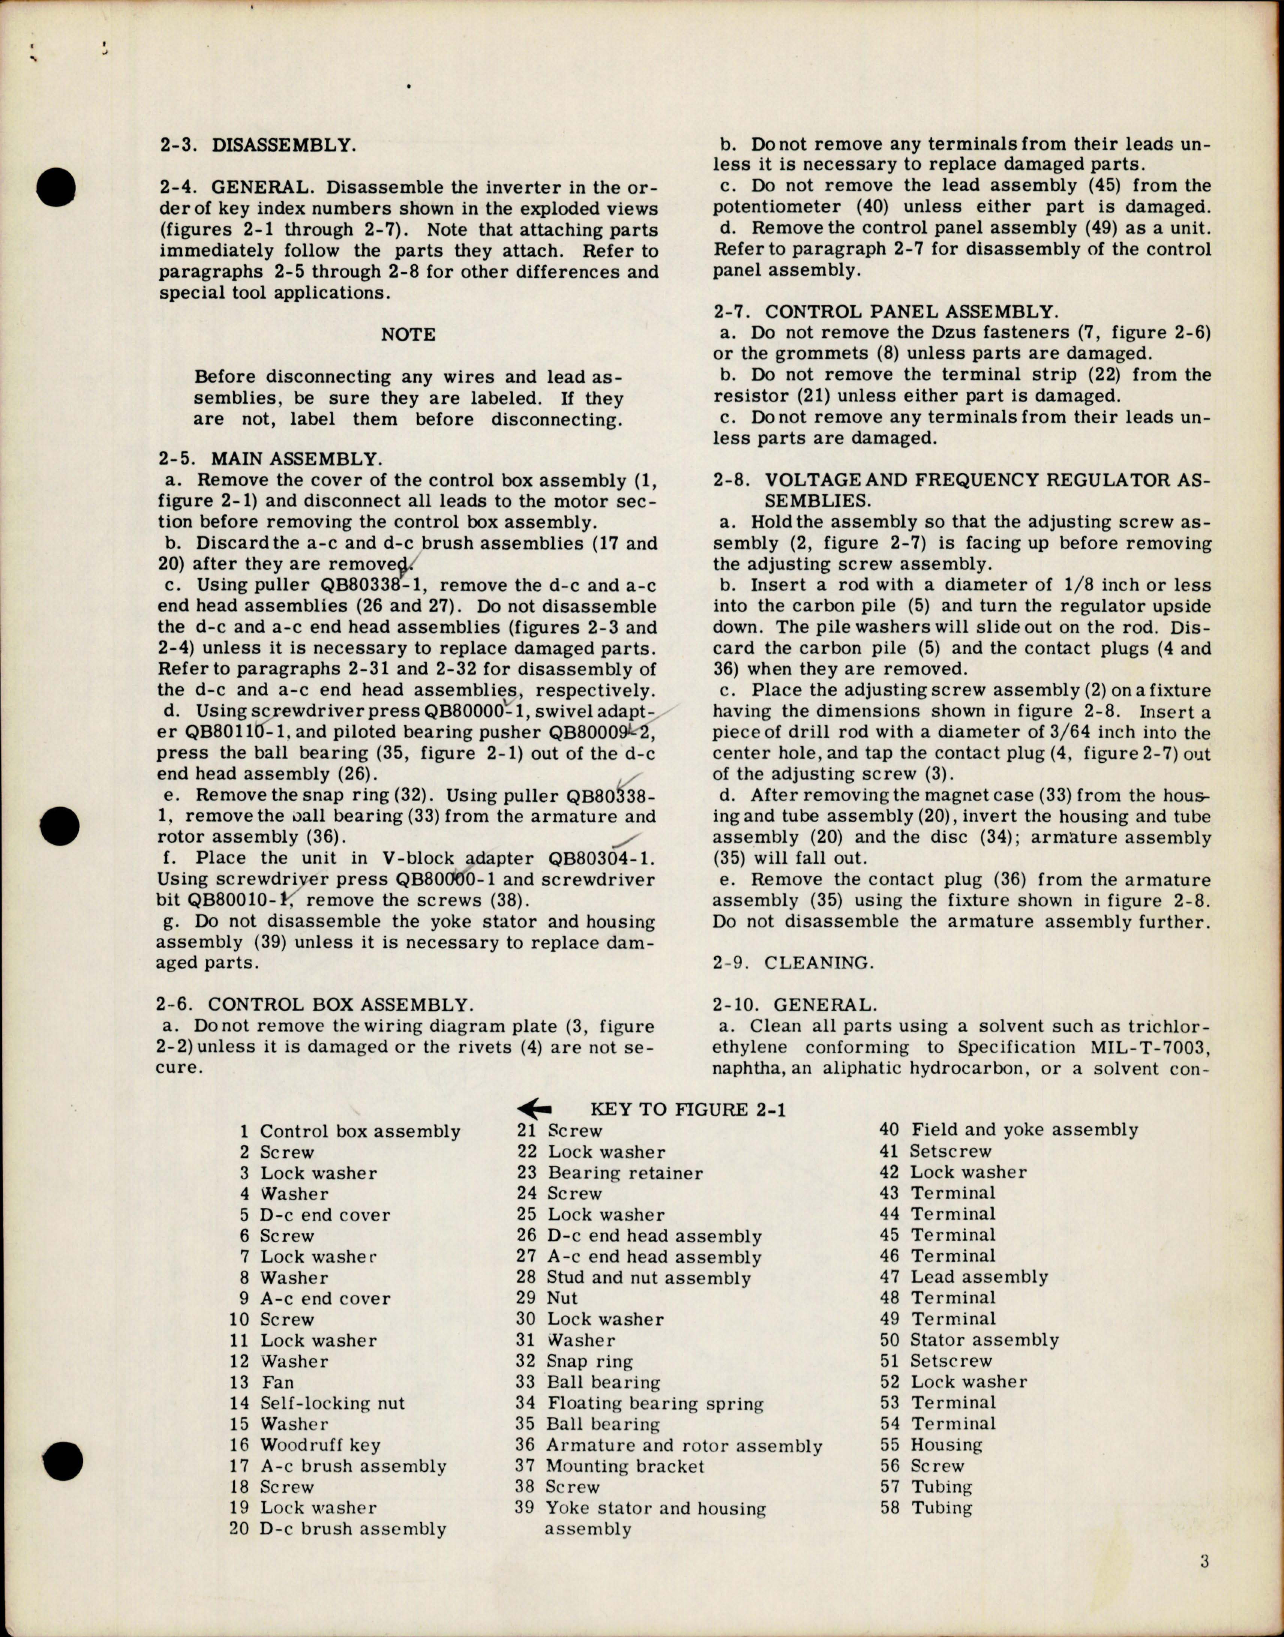 Sample page 7 from AirCorps Library document: Overhaul Instructions for Inverter - Type 32E01-2-A